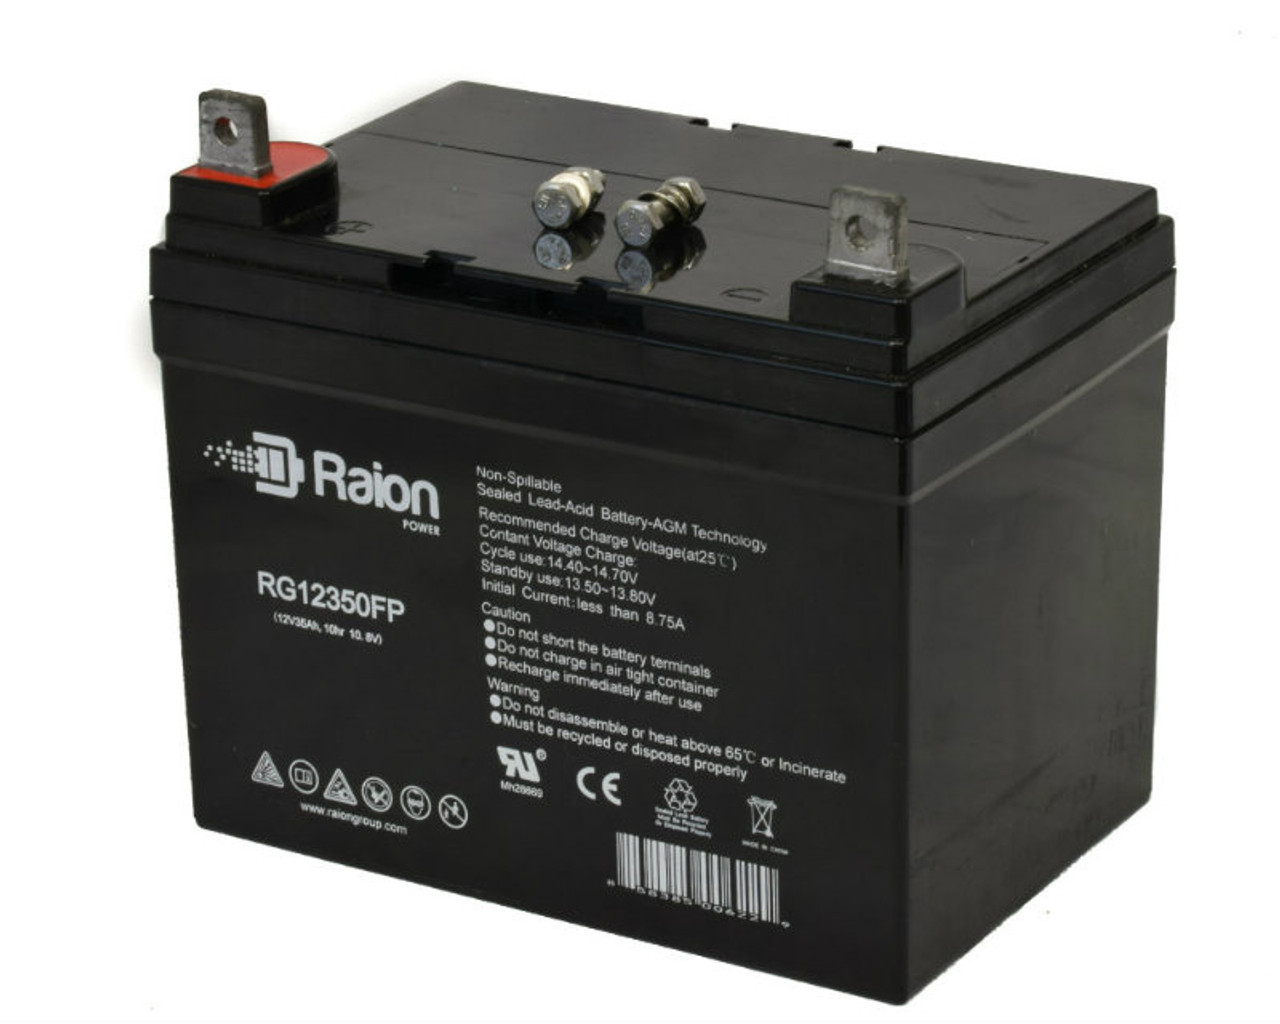 Raion Power Replacement 12V 35Ah Battery for Ingersol Equipment 80XM - 1 Pack